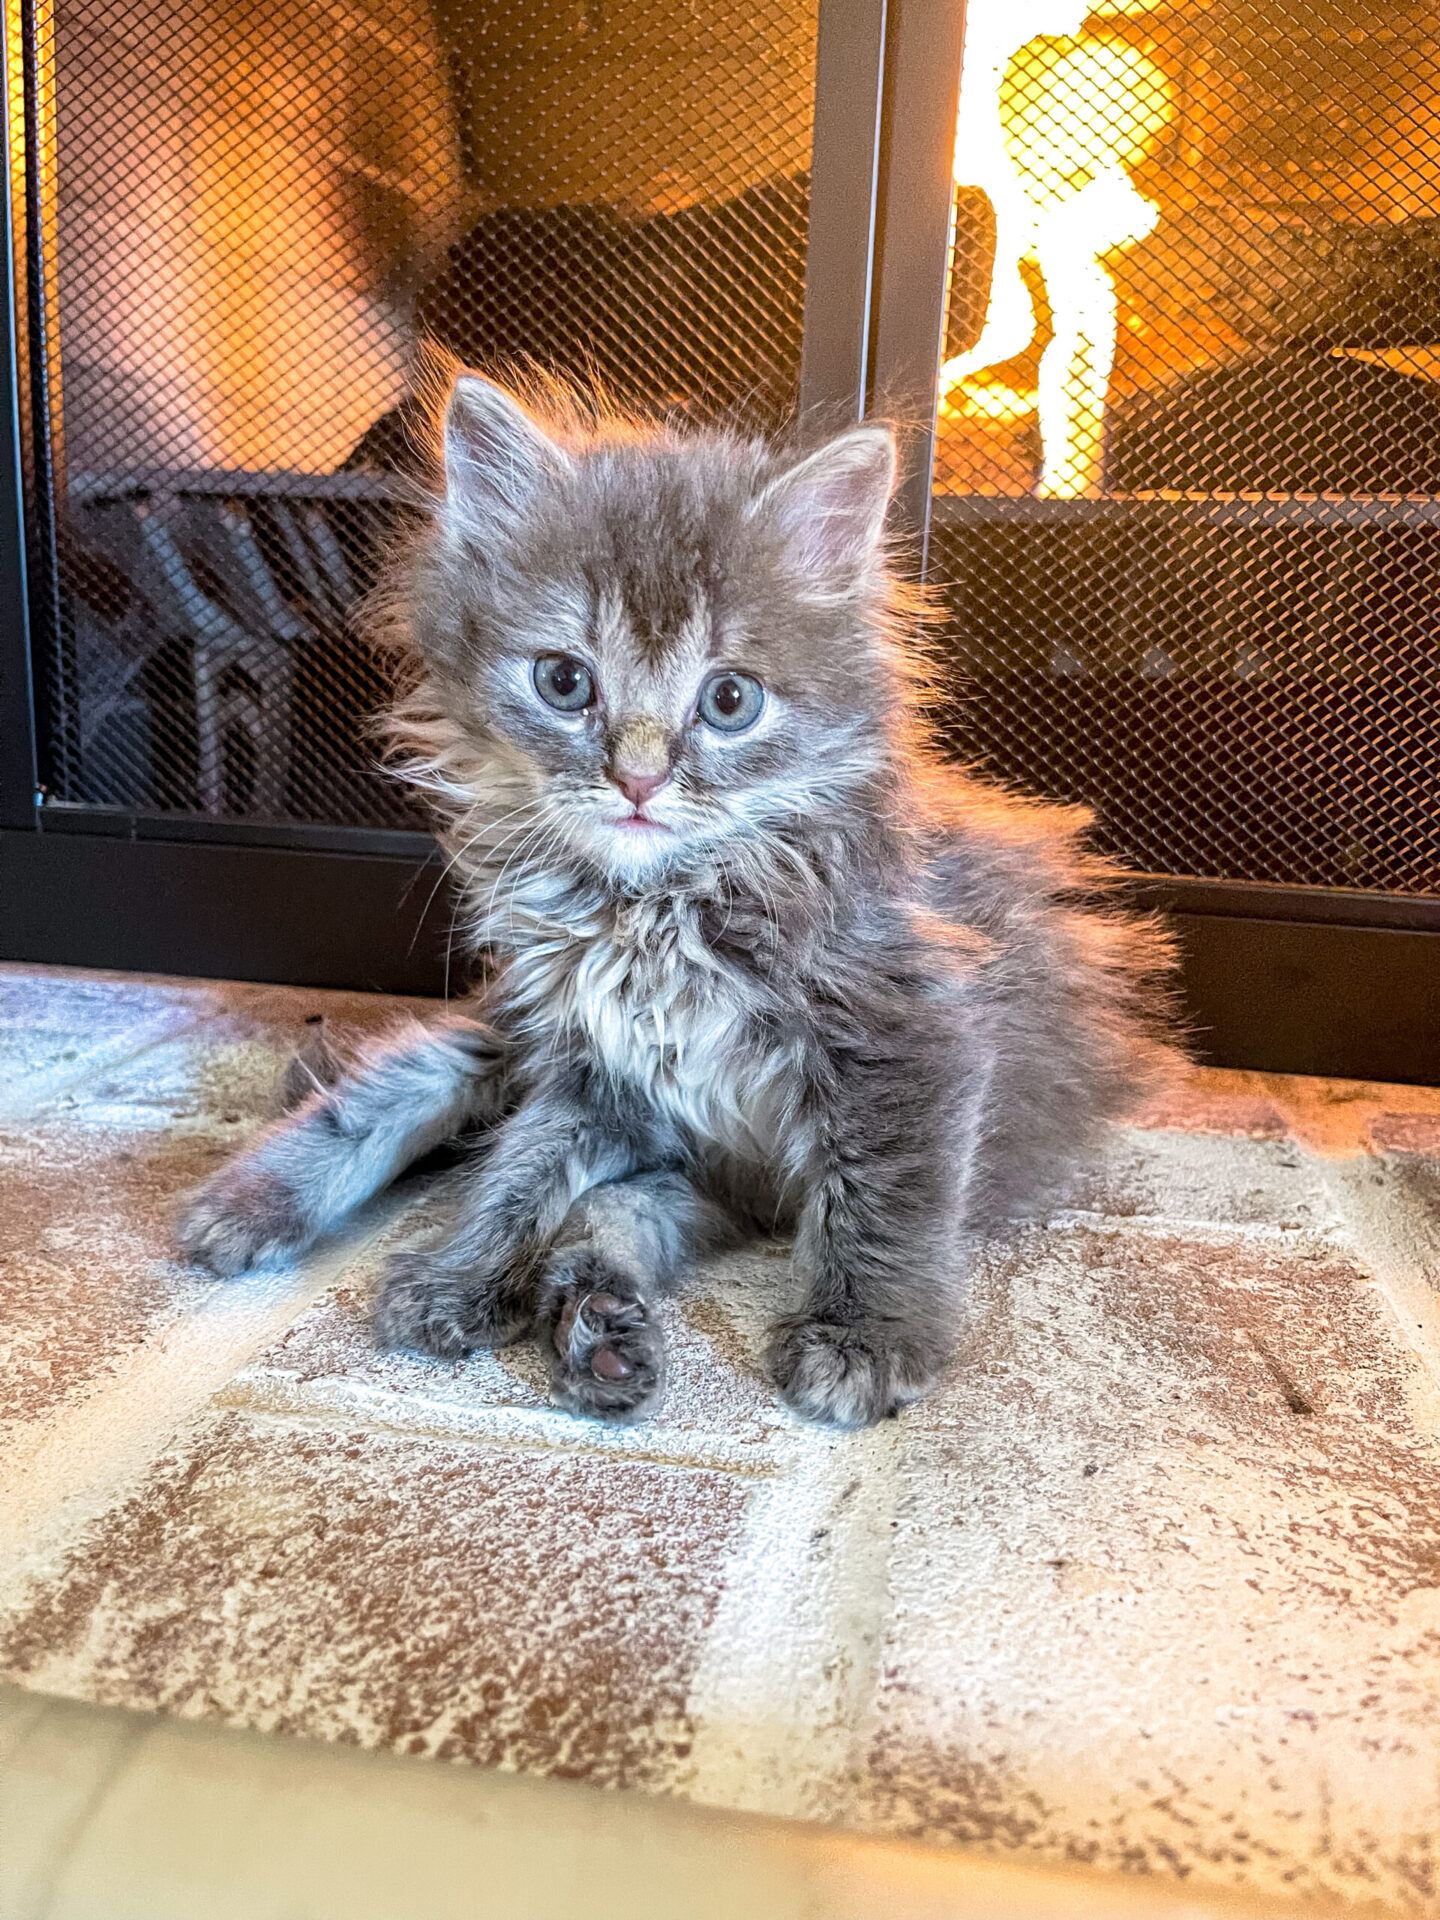 How to take care of a 4 week old kitten by Lifestyle Blogger Angela Lanter rescue foster adoption cat